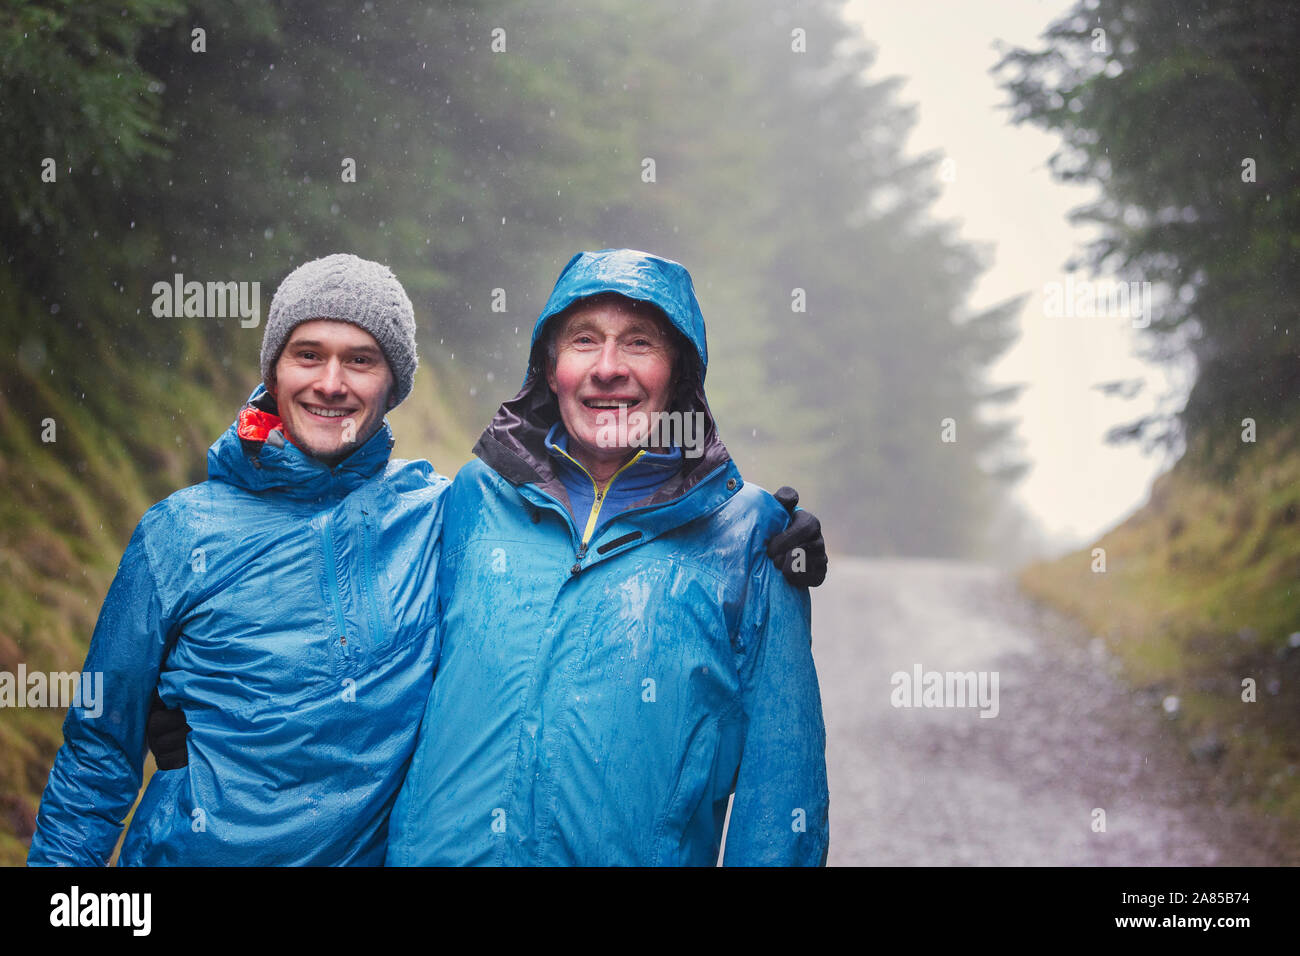 Portrait happy father and son hiking on trail in rainy woods Stock Photo